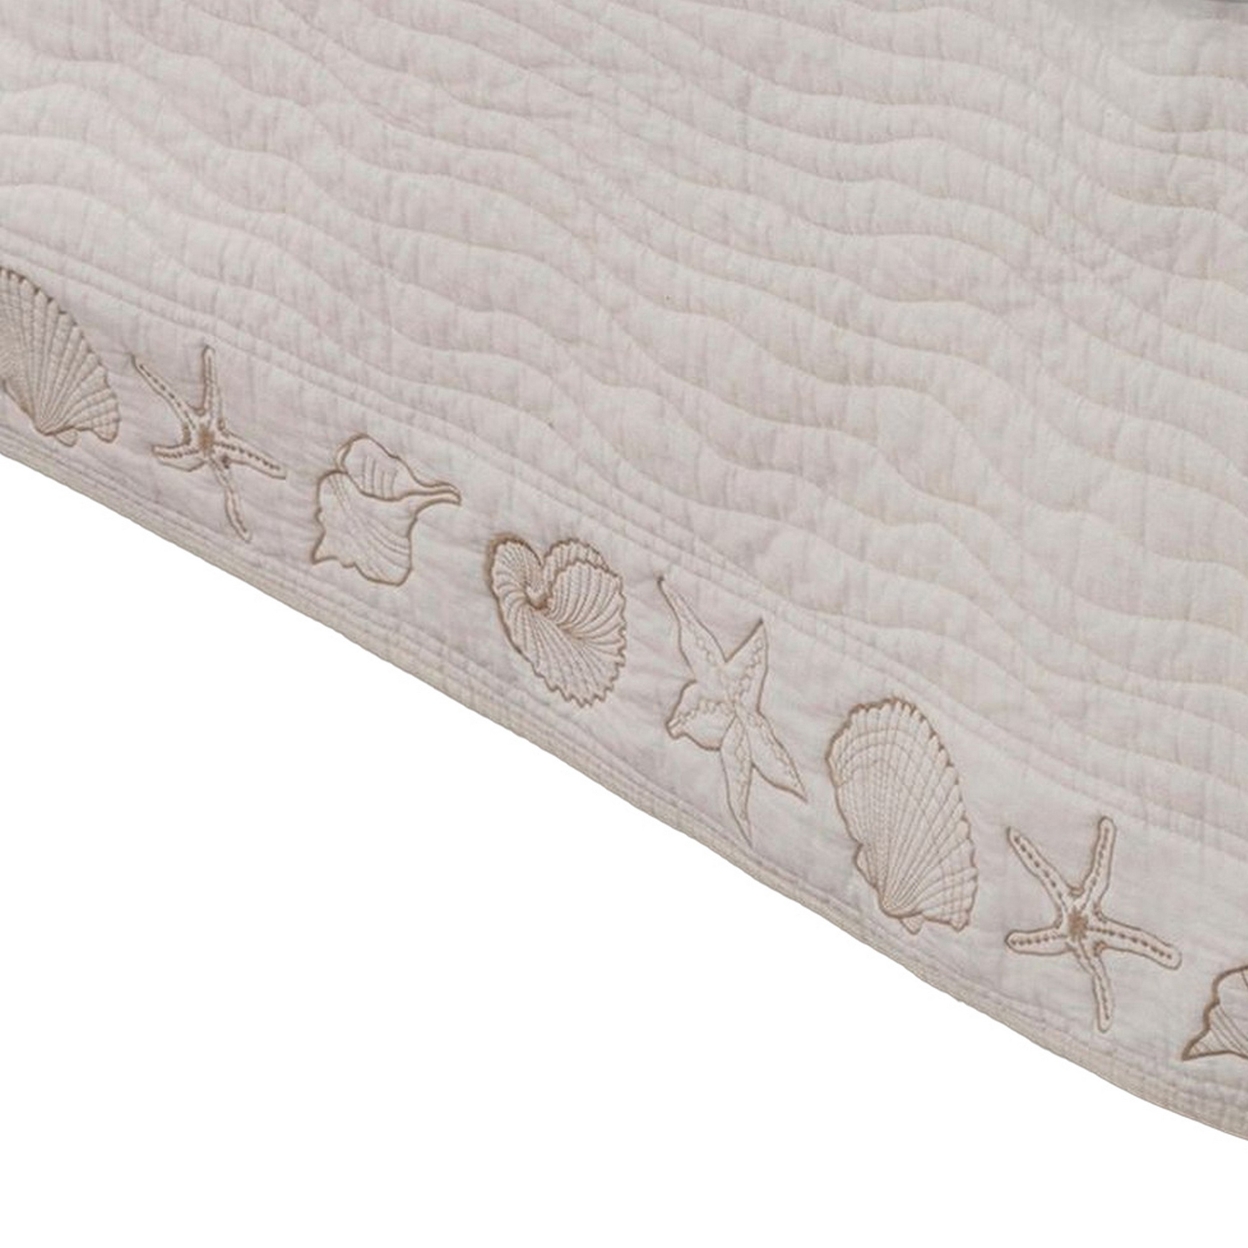 Sima Seashell Quilted Twin Bed Skirt, Cotton Fill, Triple Layered, Ivory-Saltoro Sherpi